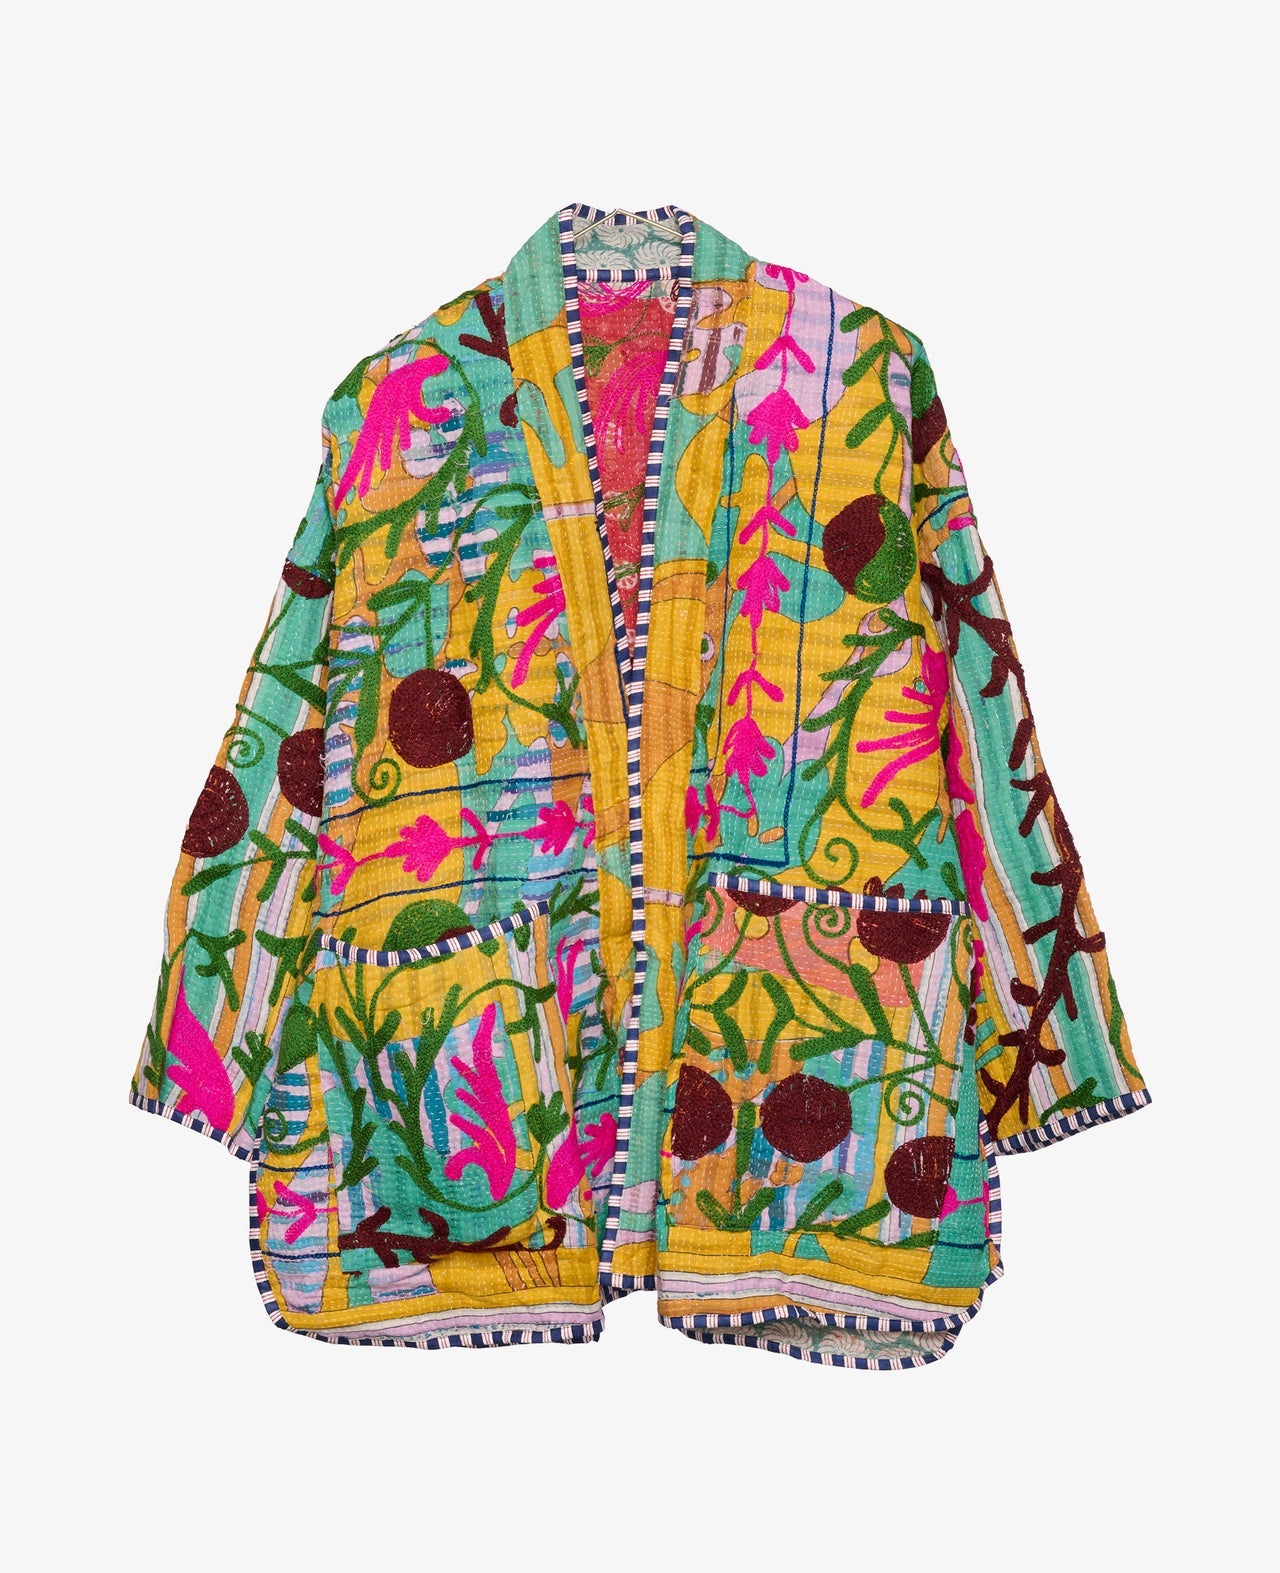 A brightly colored women's jacket embroidered with flowers and leaves by Sissel Edelbo